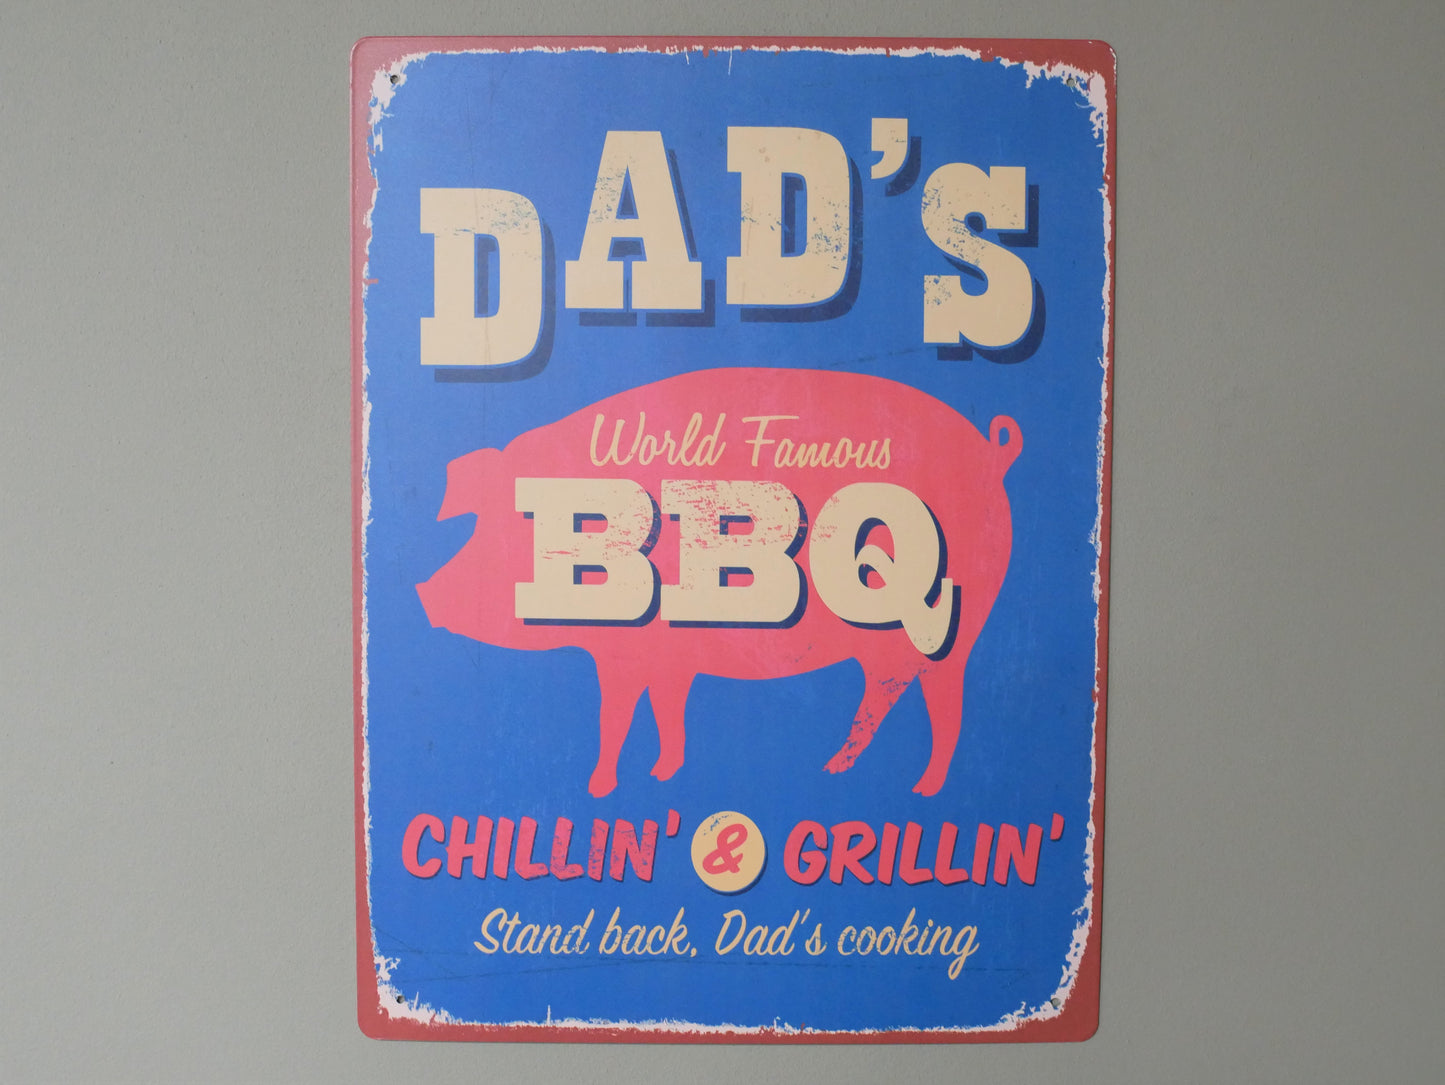 Sign (Dads BBQ)